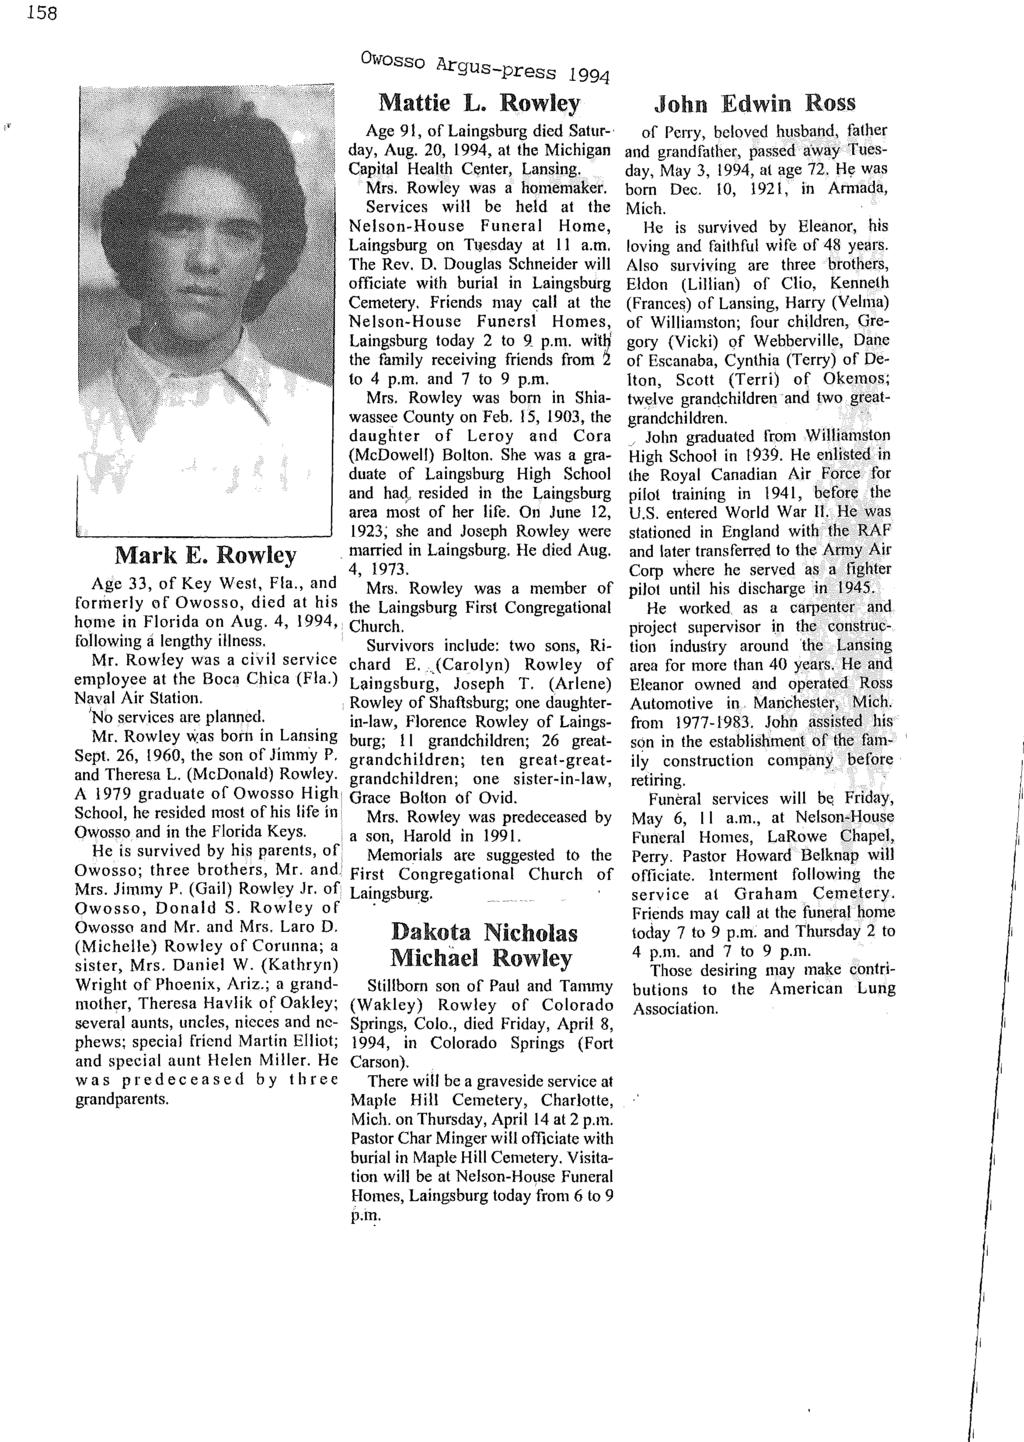 Owosso Ar gus-press 1994 Mattie L. Rowley Age 91, of Laingsburg died Saturday, Aug. 20, 1994, at the Michigan Capital Health Center, Lansing. Mrs. Rowley was a homemaker.